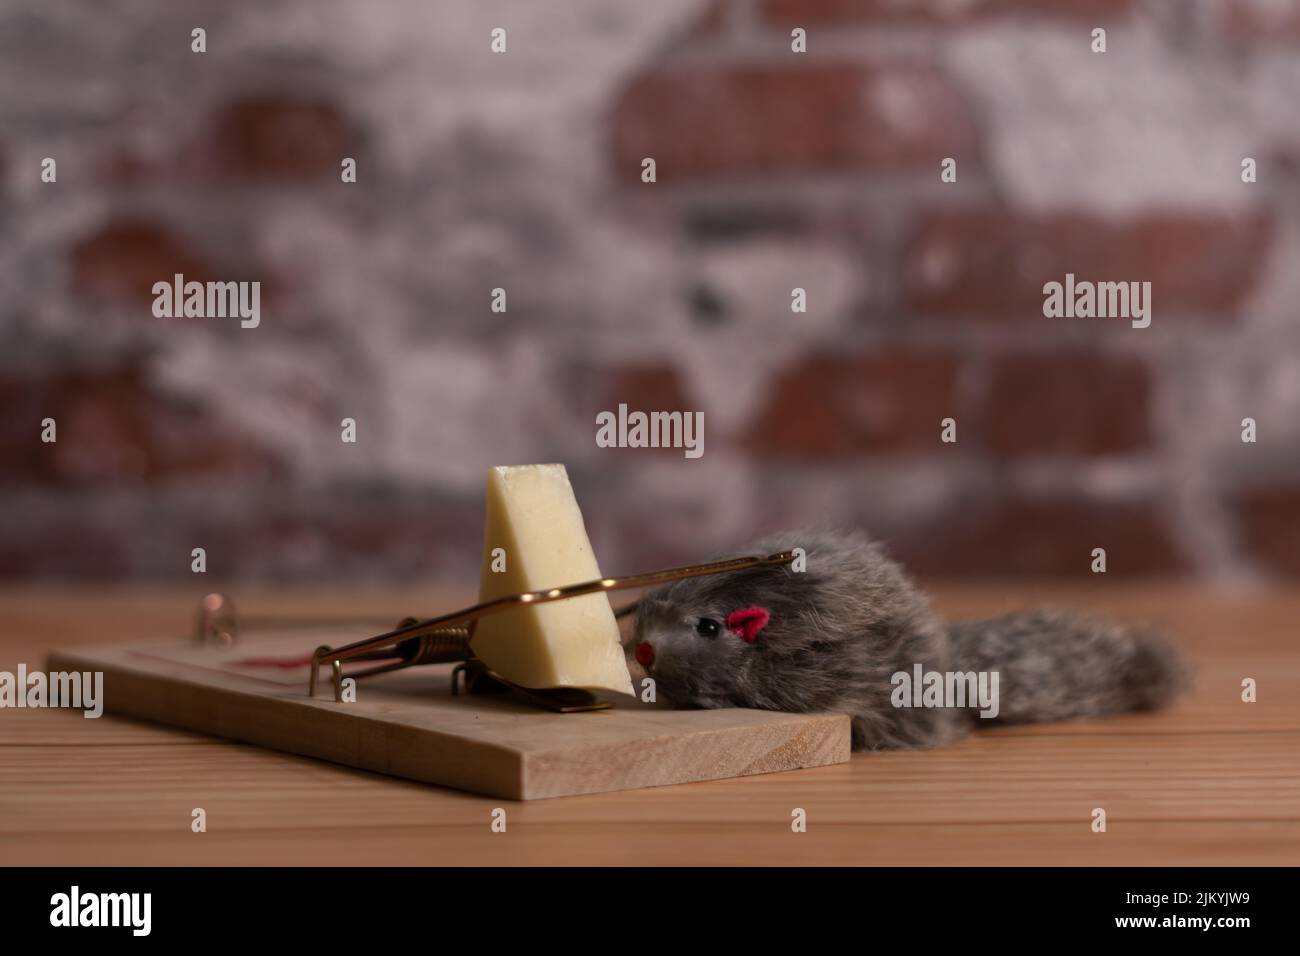 https://c8.alamy.com/comp/2JKYJW9/toy-mouse-trapped-in-a-trap-with-bait-cheese-2JKYJW9.jpg